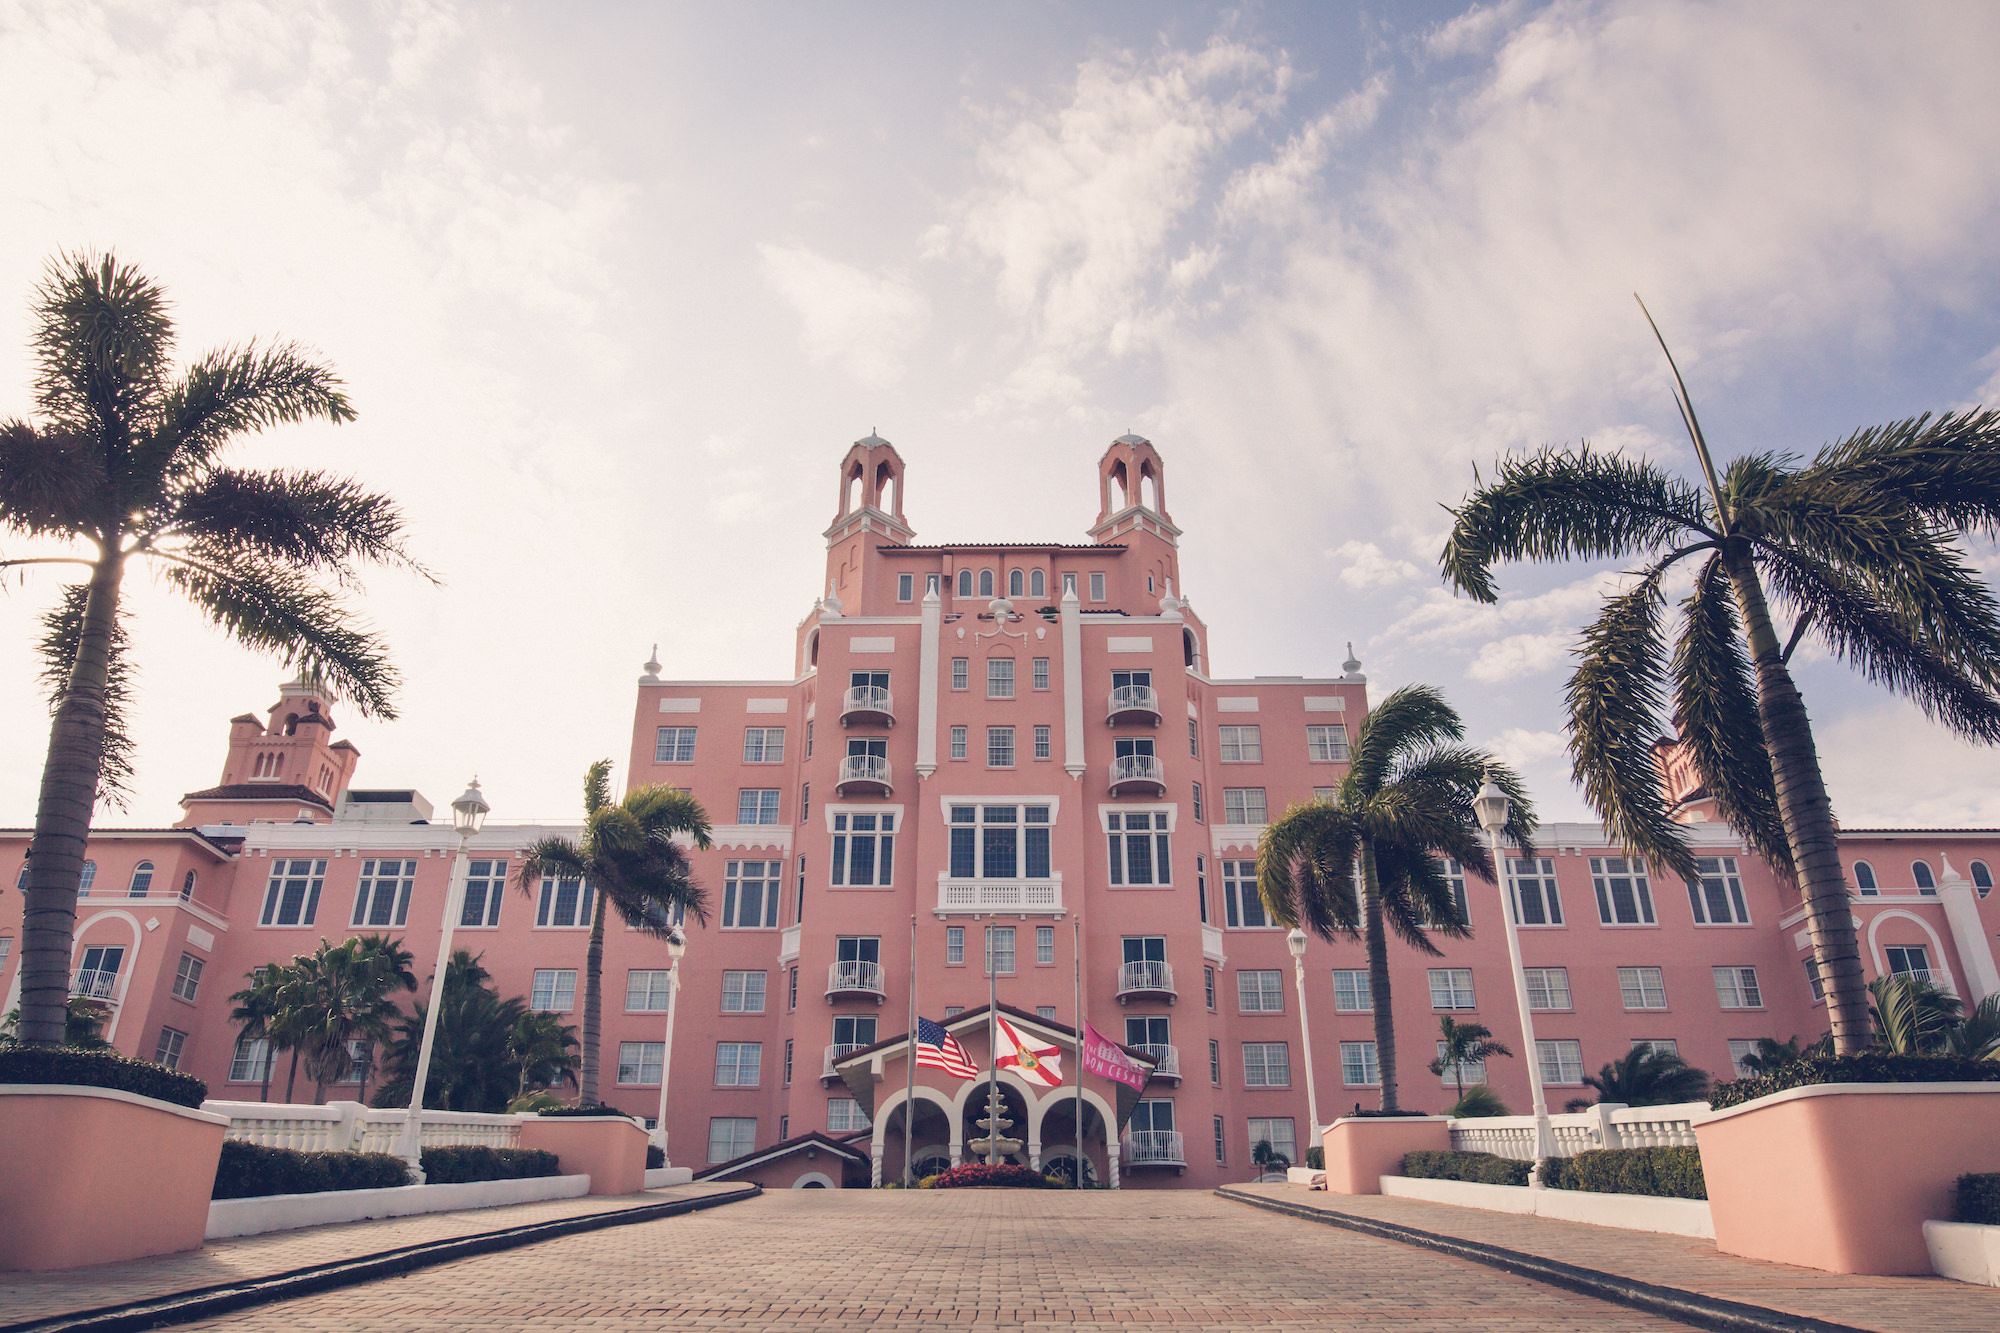 Historic Florida Wedding Venue The Don CeSar Hotel in St. Pete Beach | Wedding Photographer Luxe Light Images